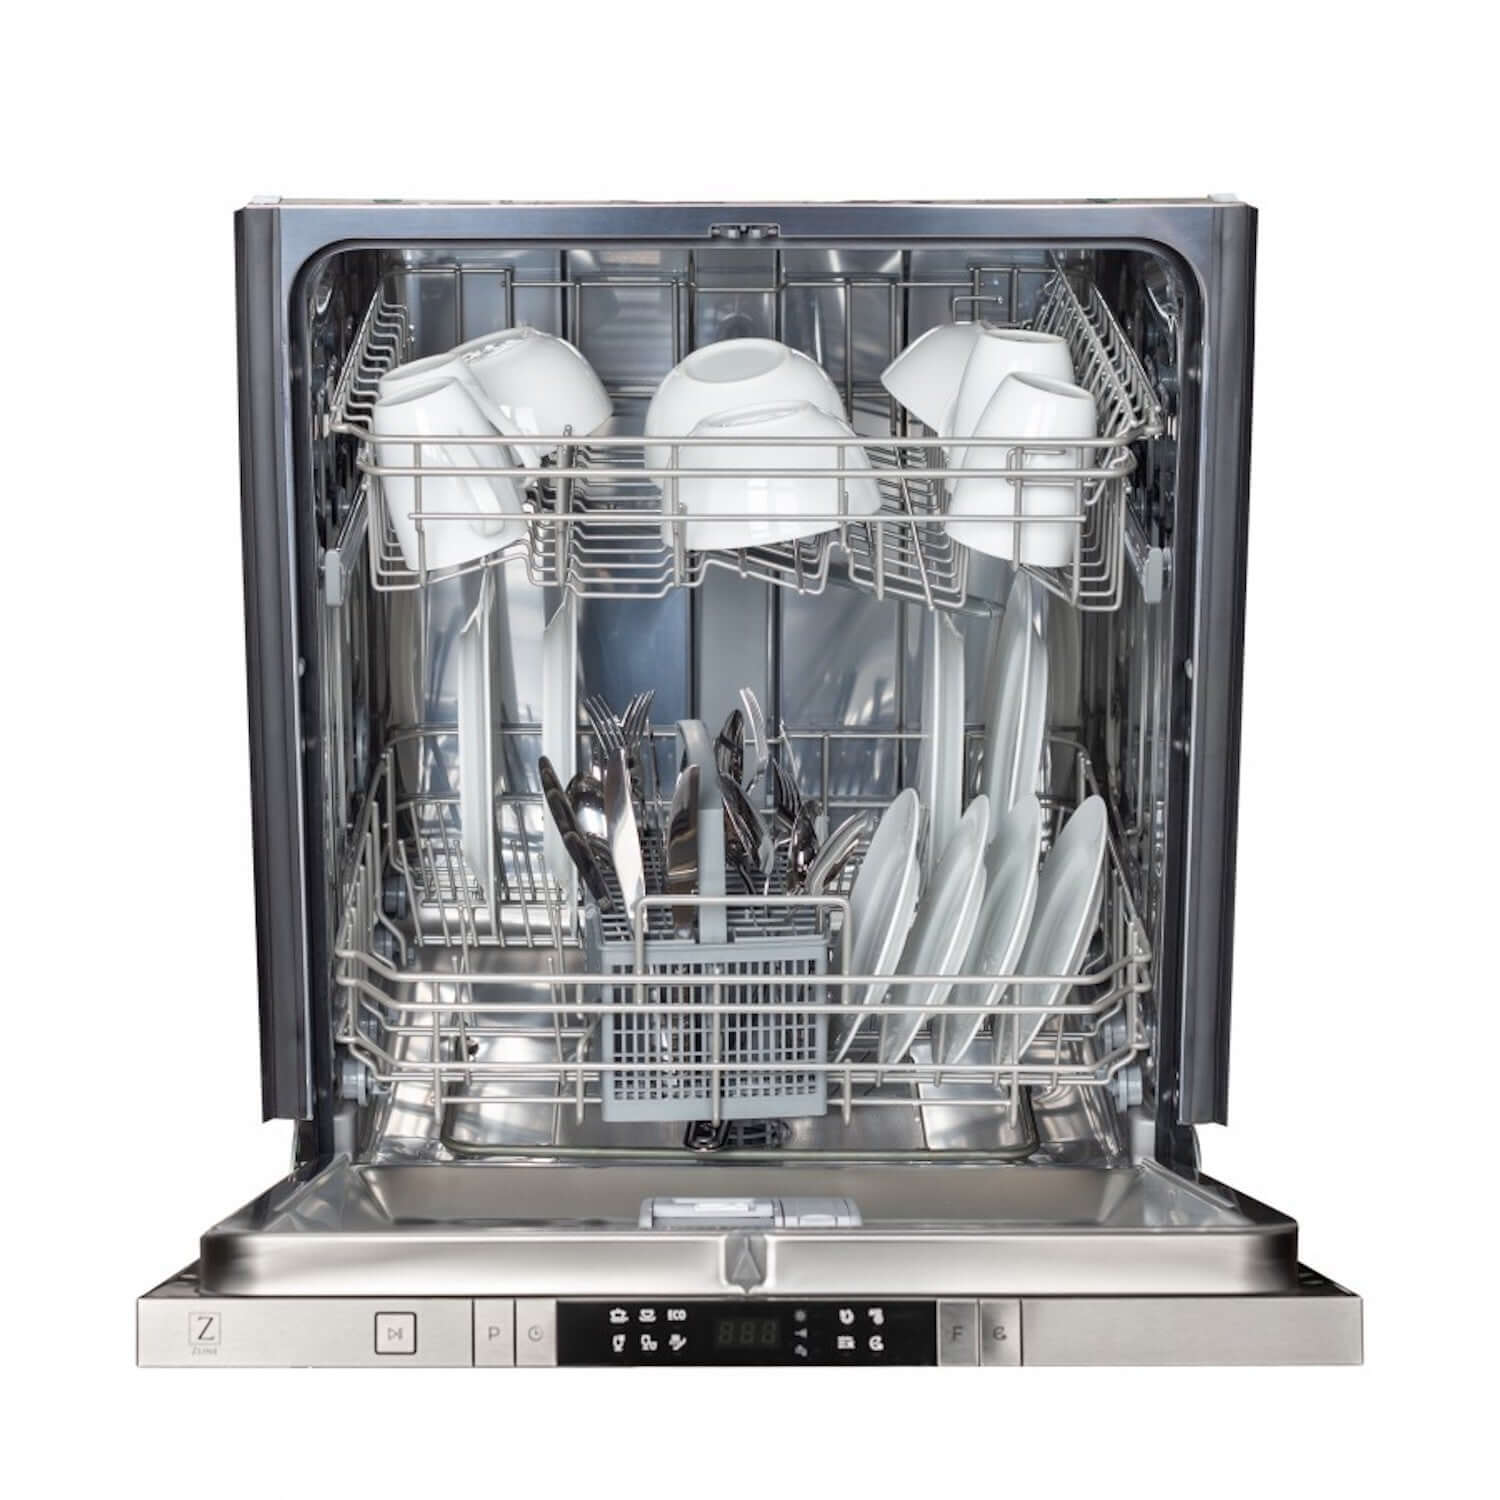 ZLINE 24 in. Fingerprint Resistant Top Control Built-In Dishwasher with Stainless Steel Tub and Modern Style Handle, 52dBa (DW-SN-24) front, open with dishes loaded.